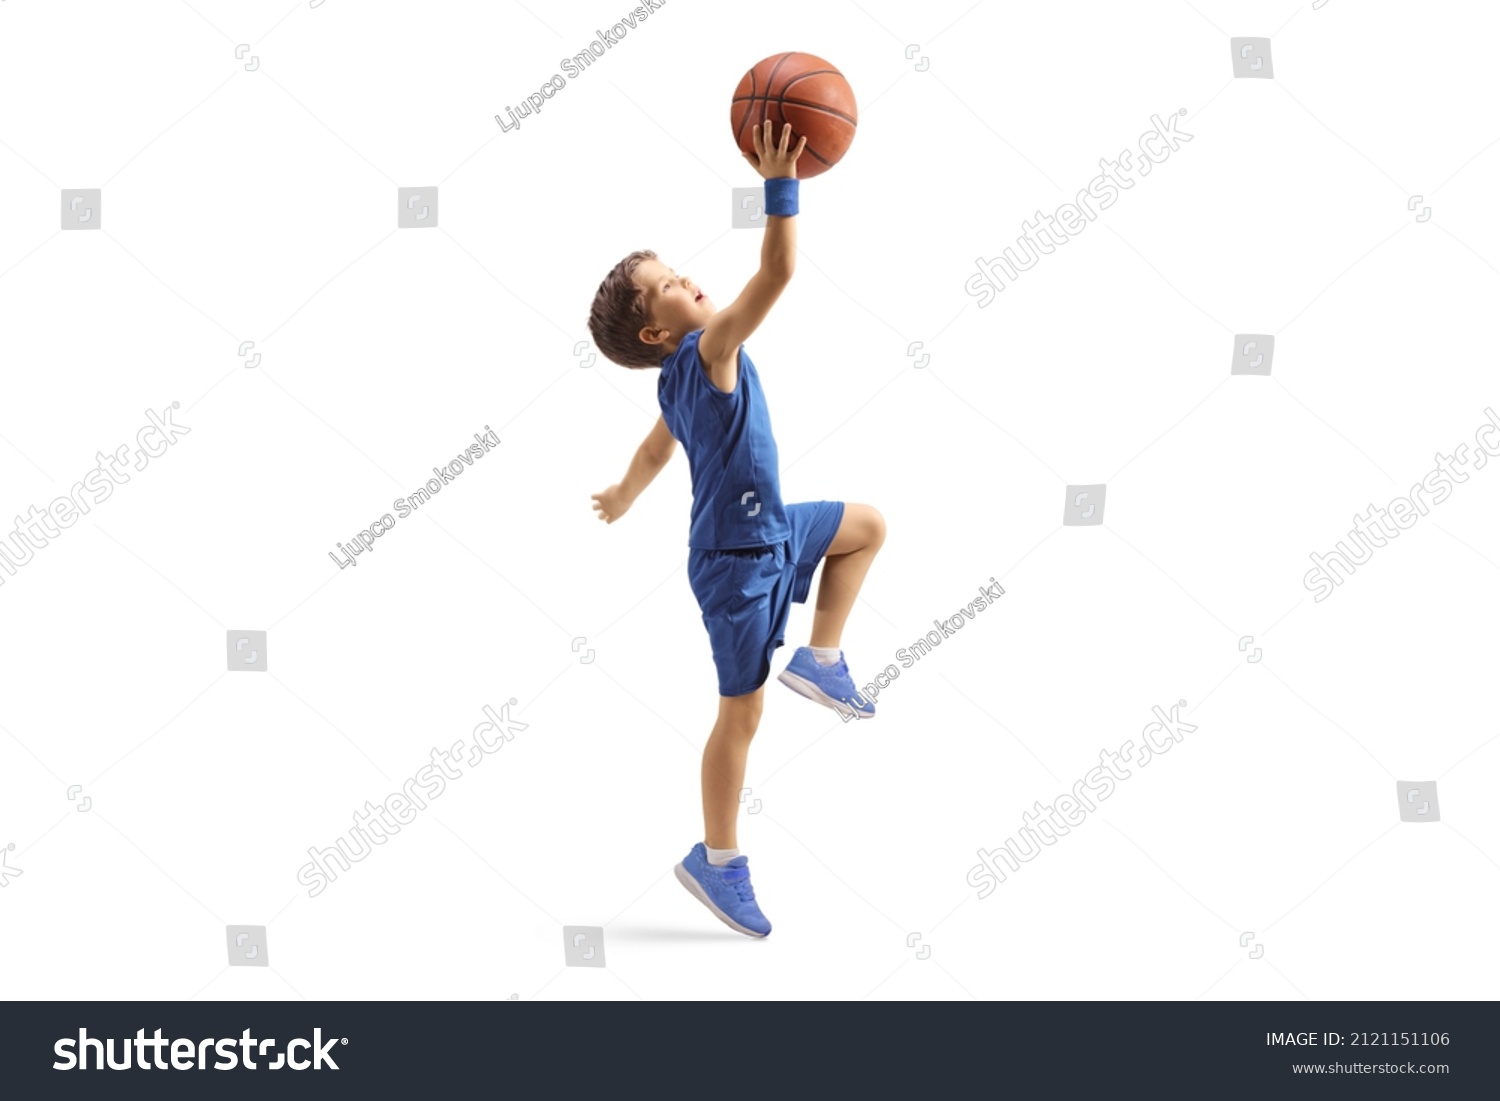 Full length profile shot of a boy in a blue jersey jumping with a basketball isolated on white background #2121151106